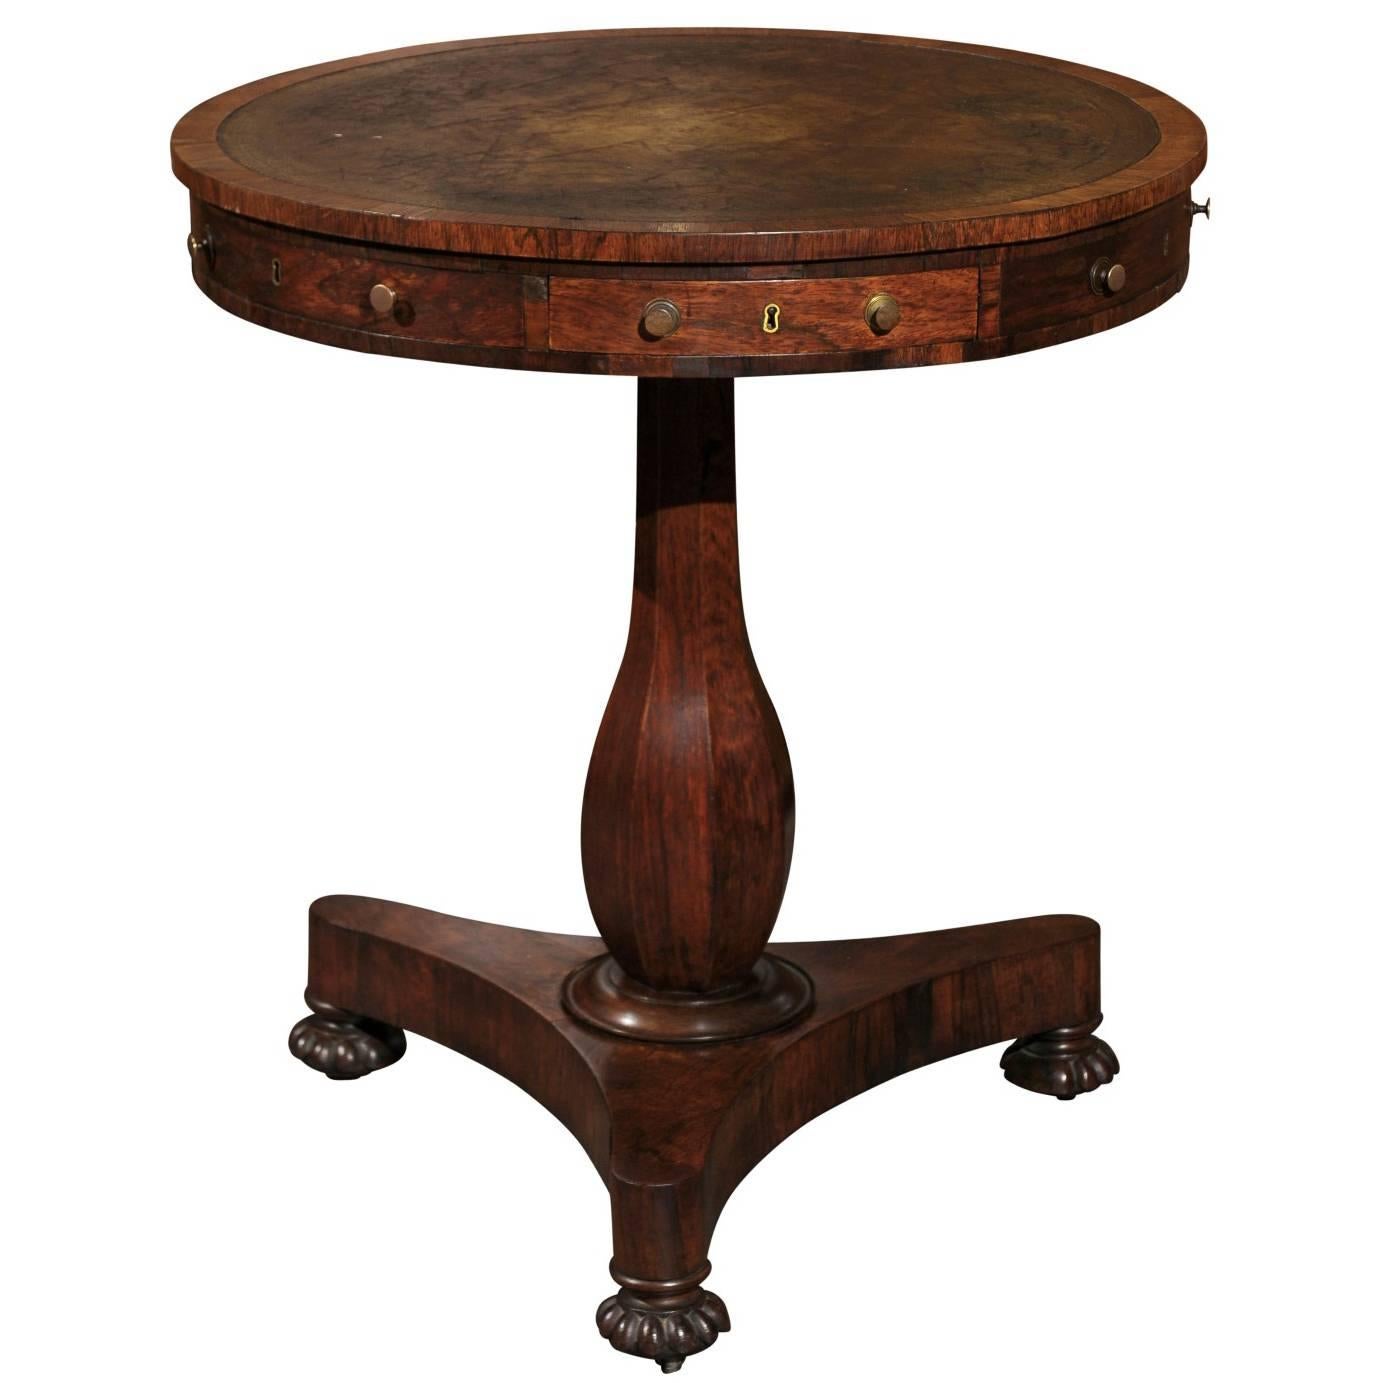 English 19th century Regency Leather Top Drum Table with Triangular Base